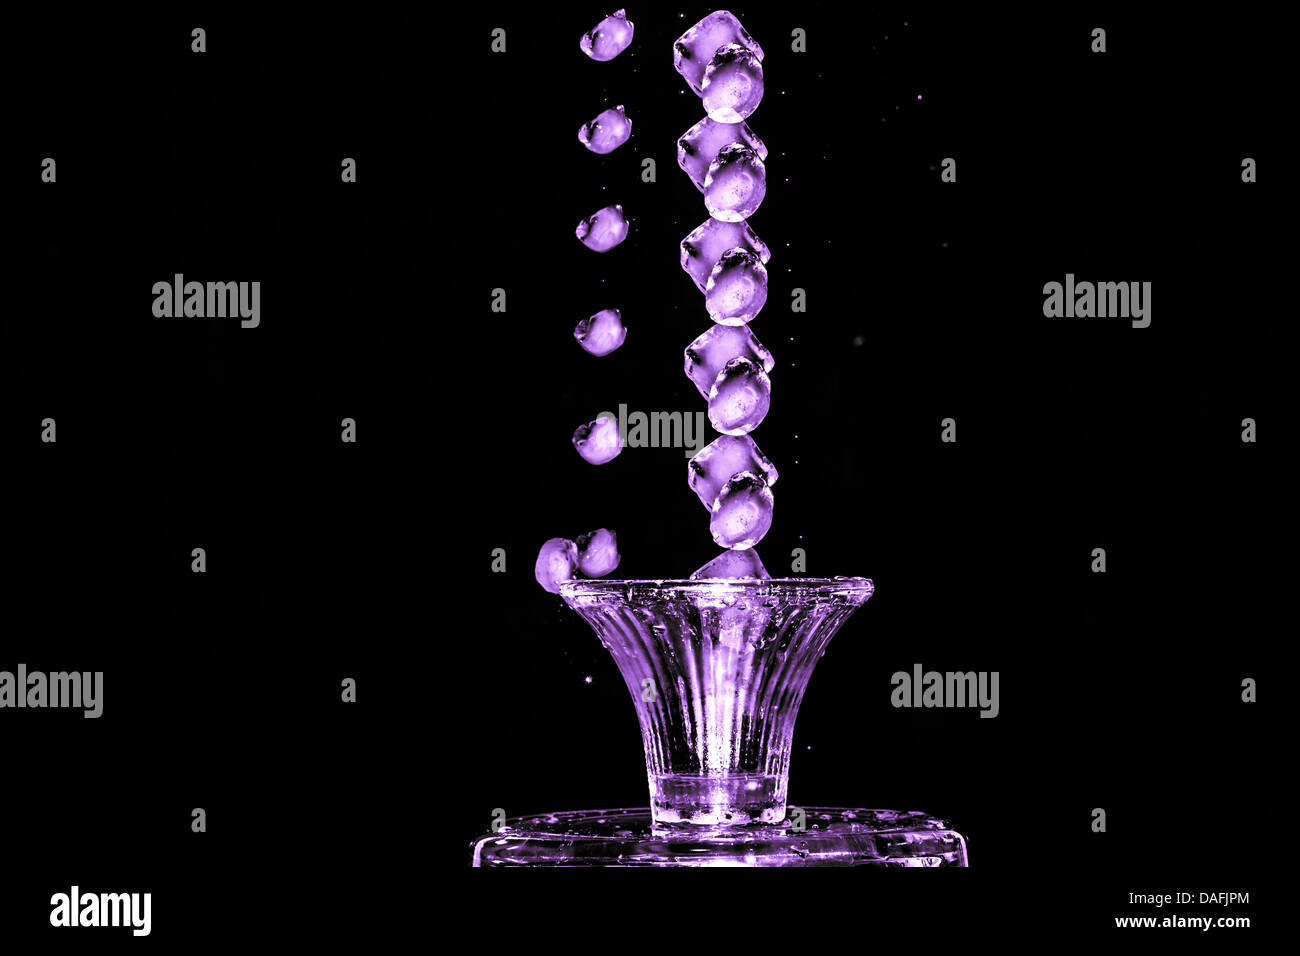 Stroboscopic effect created using flash capturing the motion ice as it splashes into a glass Stock Photo